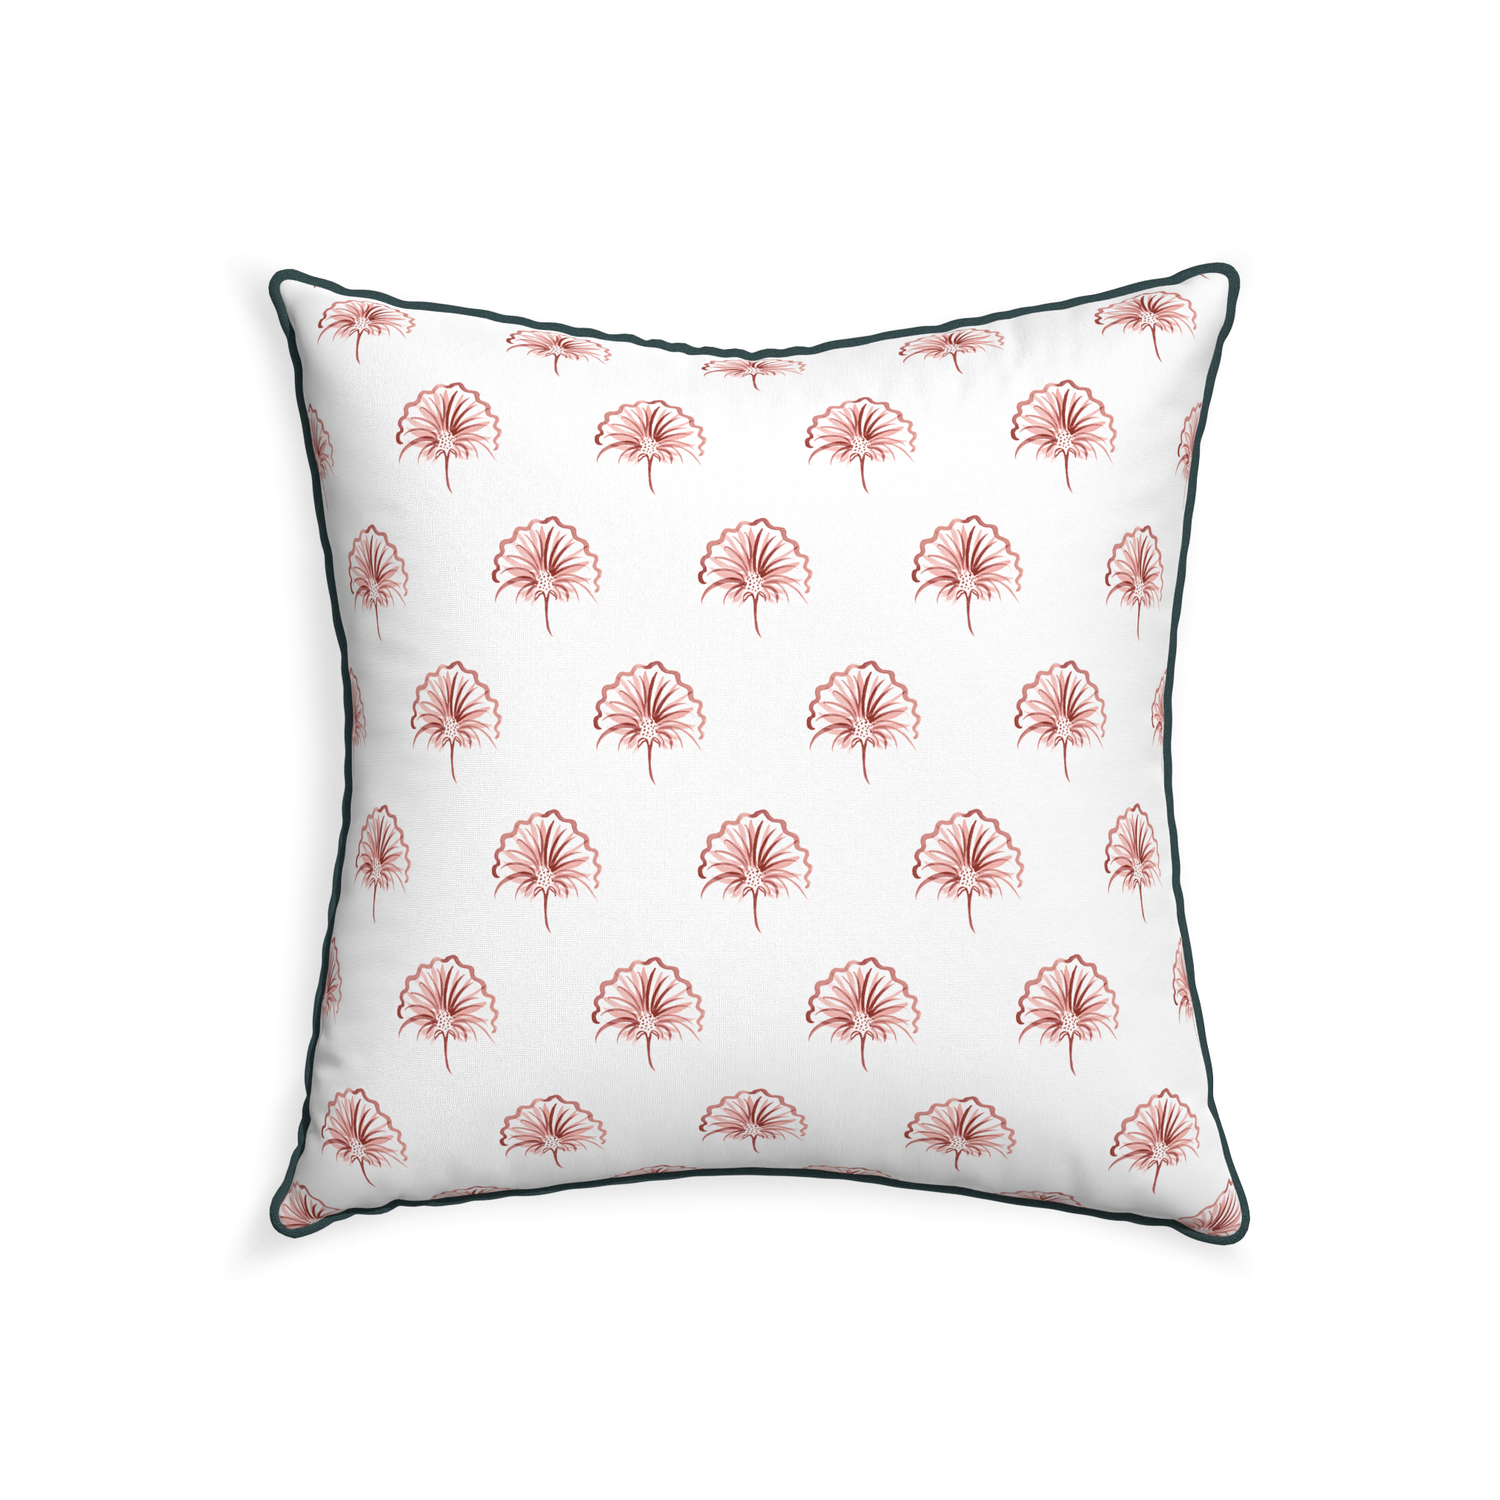 22-square penelope rose custom floral pinkpillow with p piping on white background